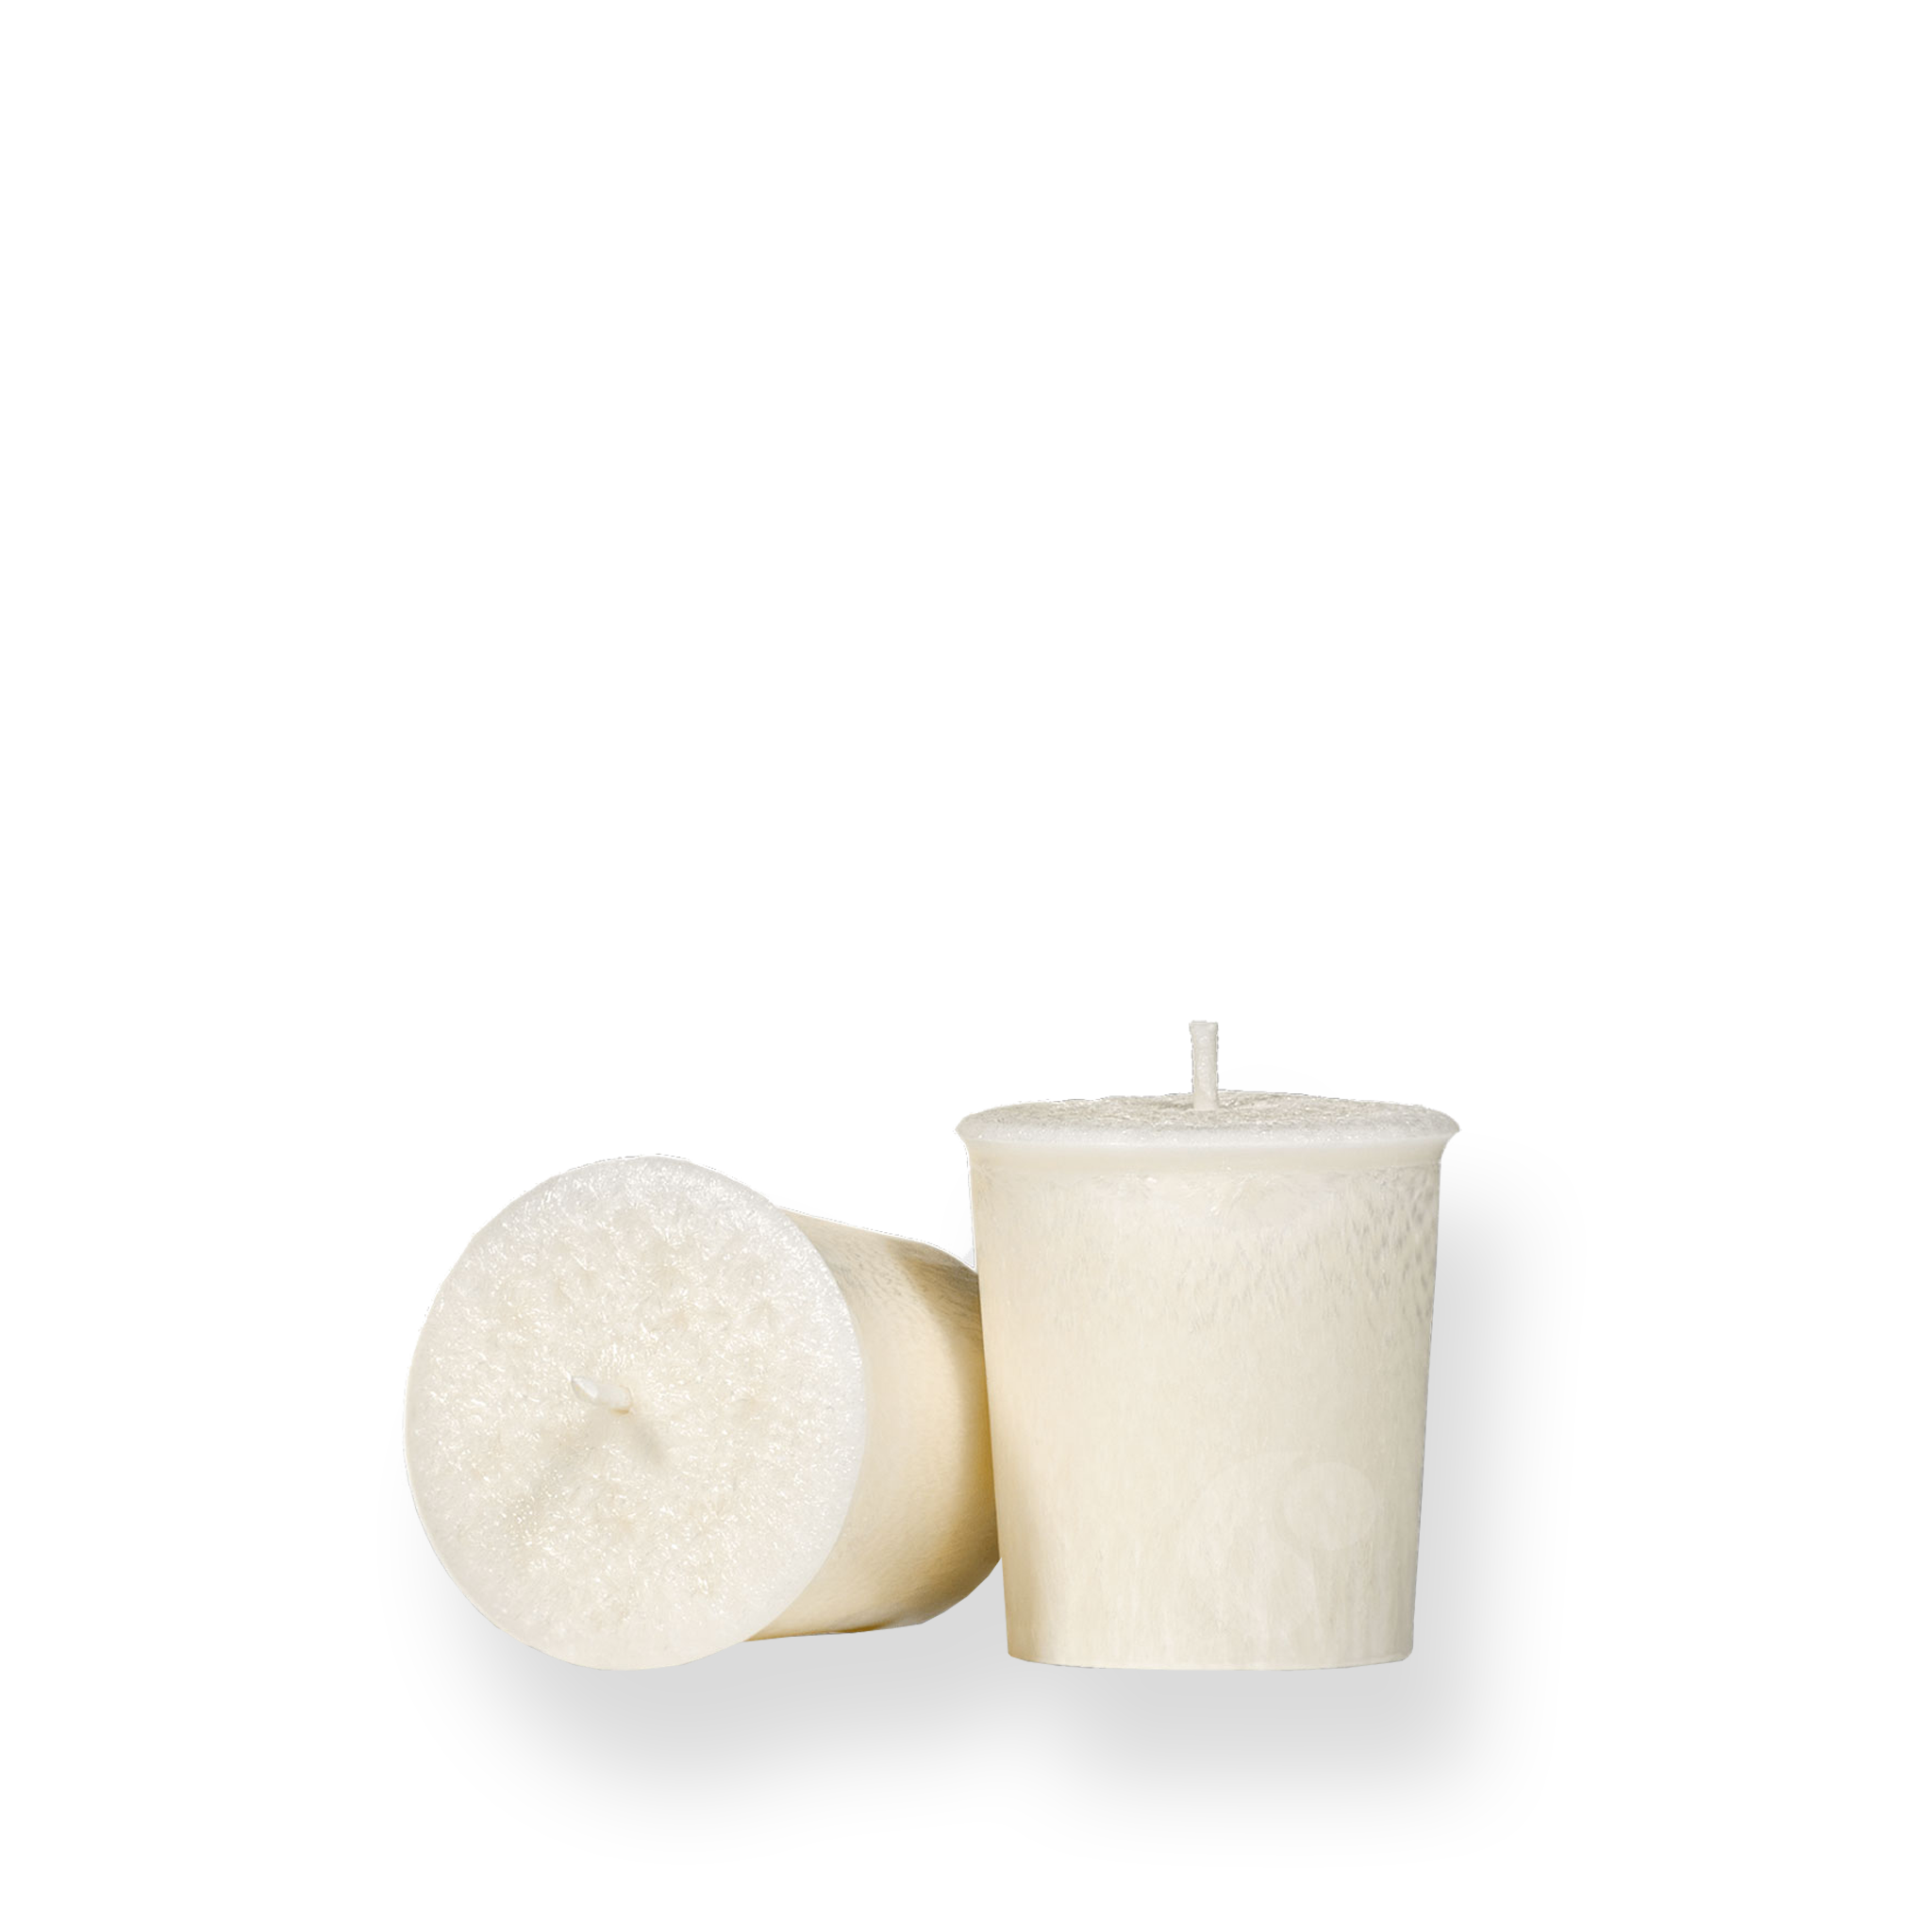 Do Not Eat! · Votive Candle